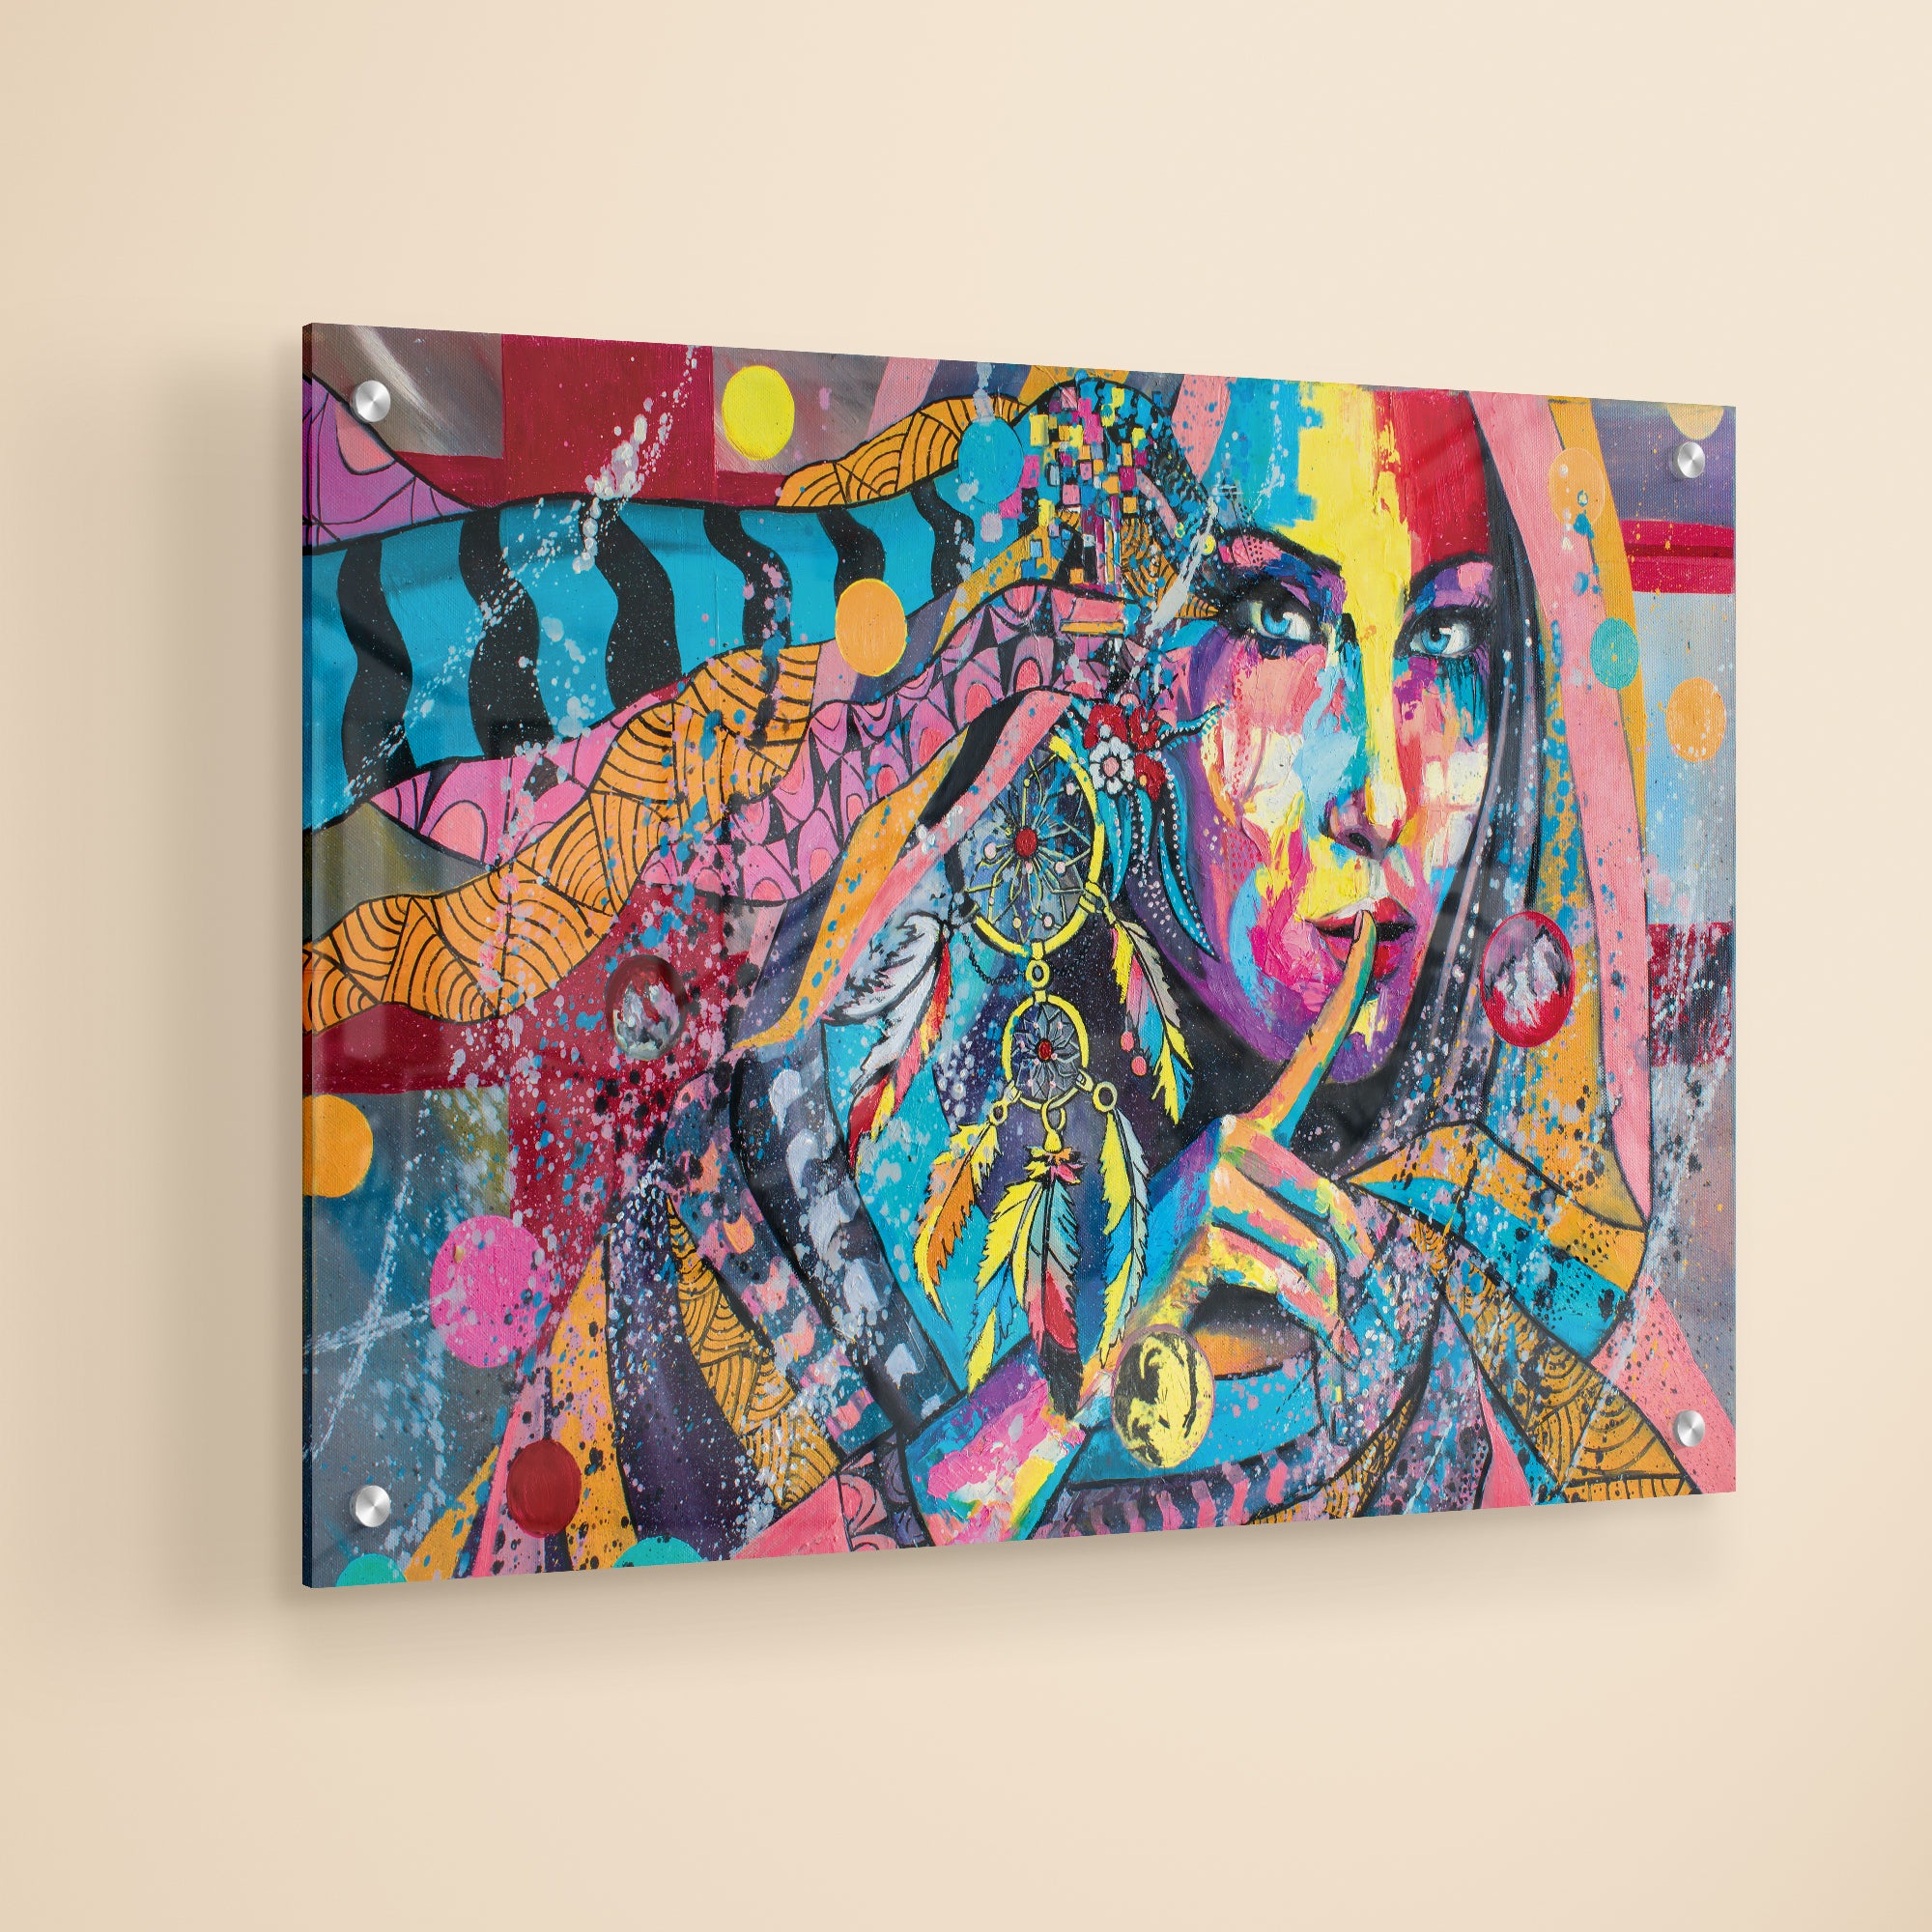 Perspex Indian Woman Premium Acrylic Wall Painting